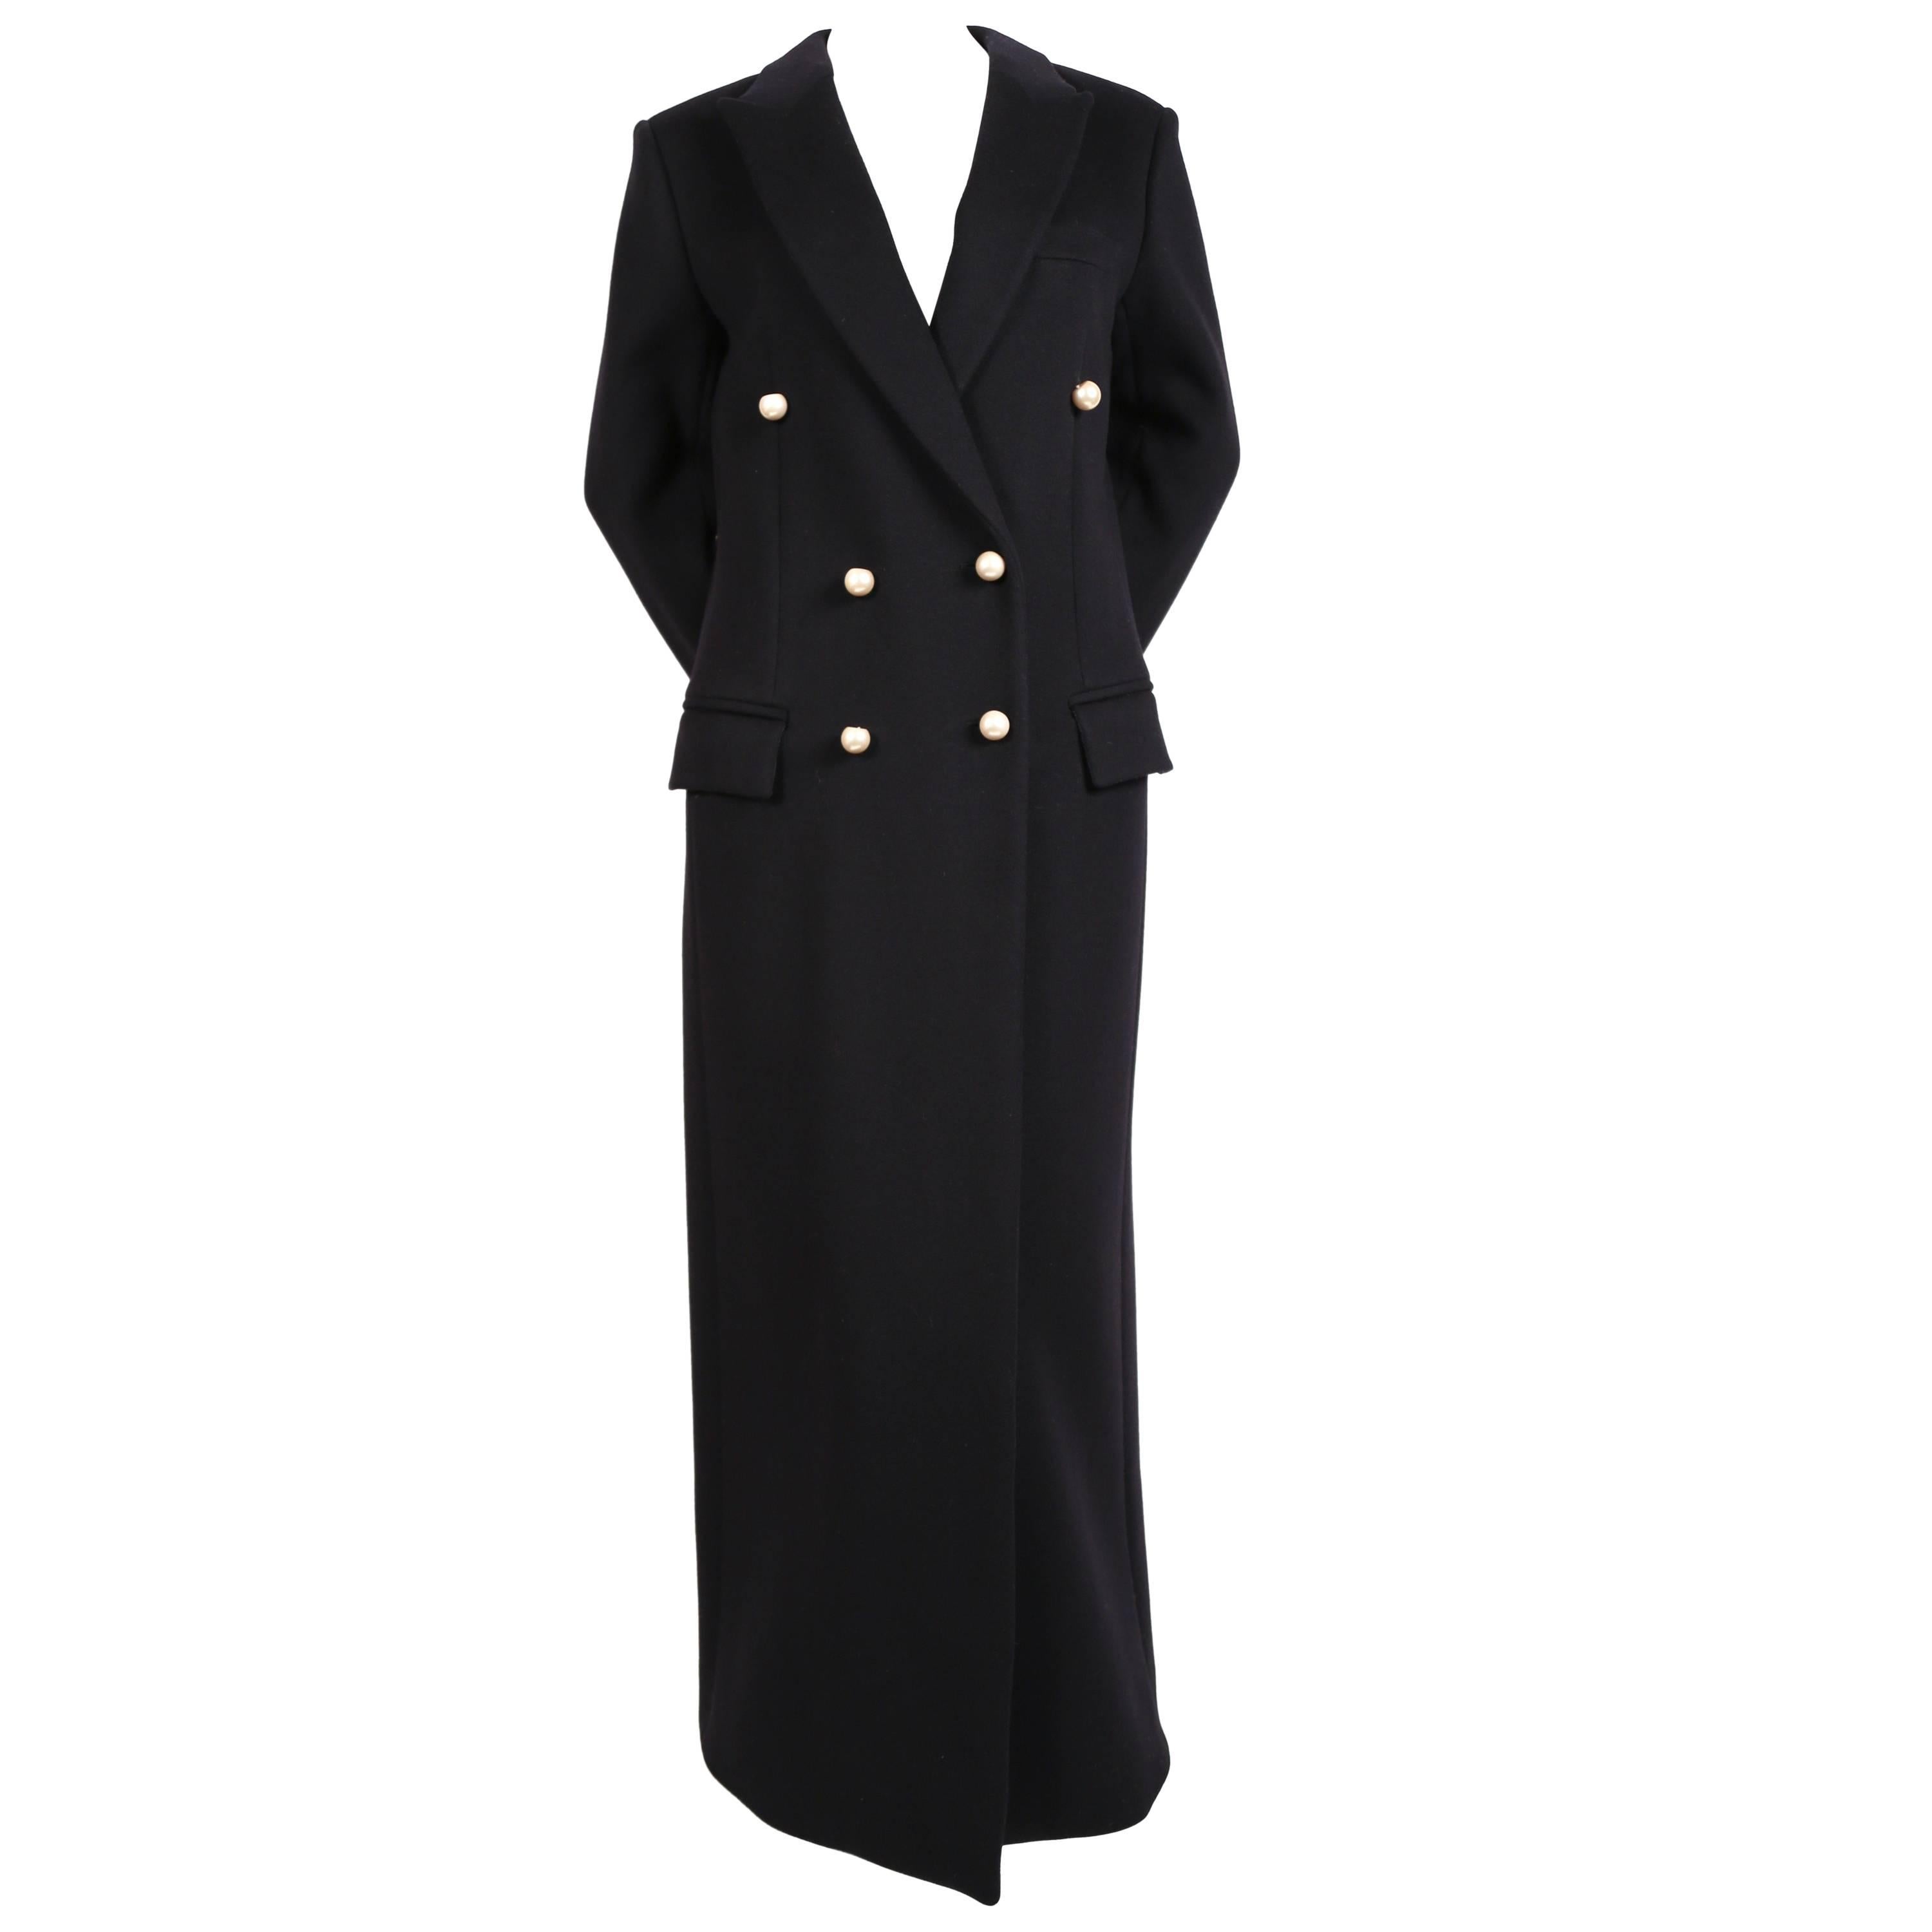 Celine by Phoebe Philo navy blue wool coat with pearl buttons